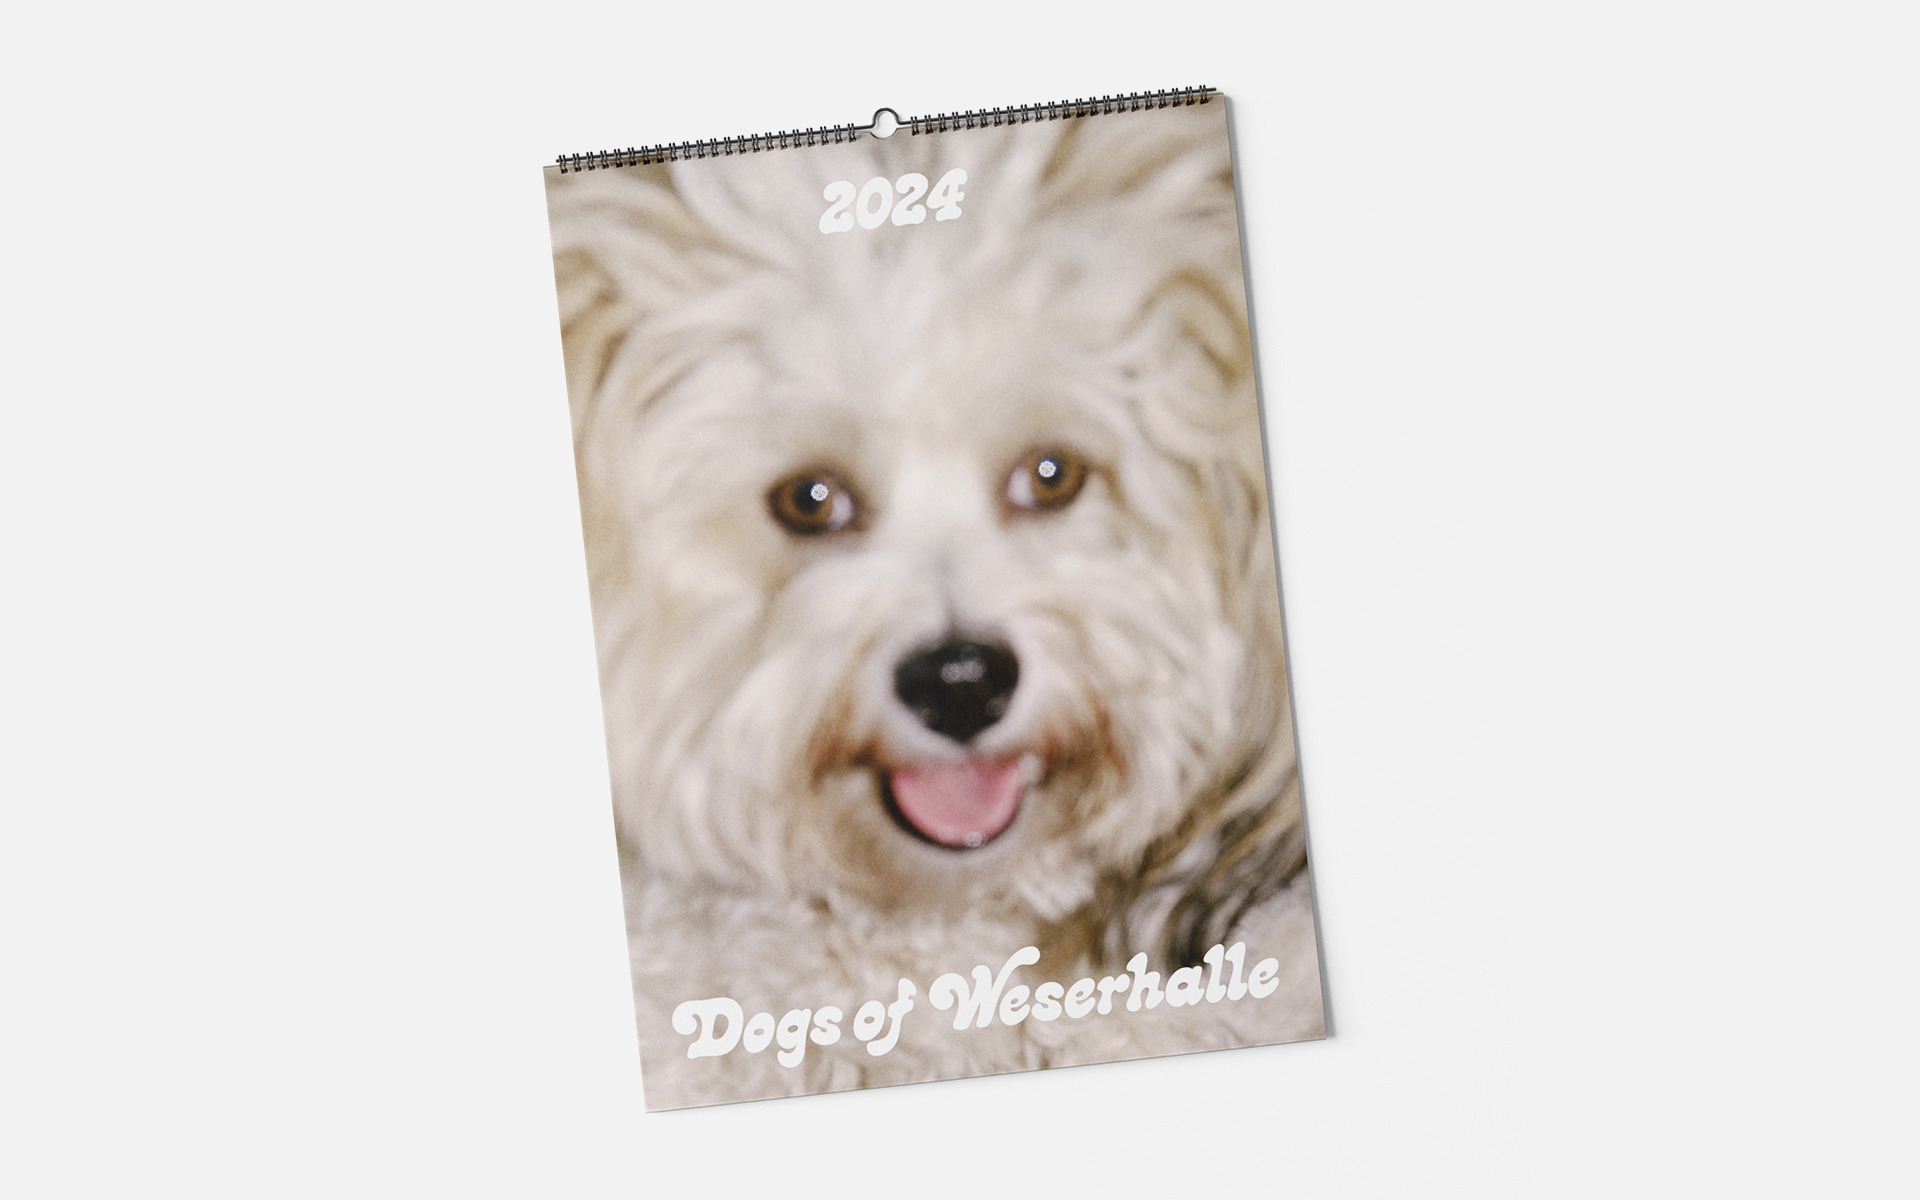 Dog Calendar: Almost Sold Out!